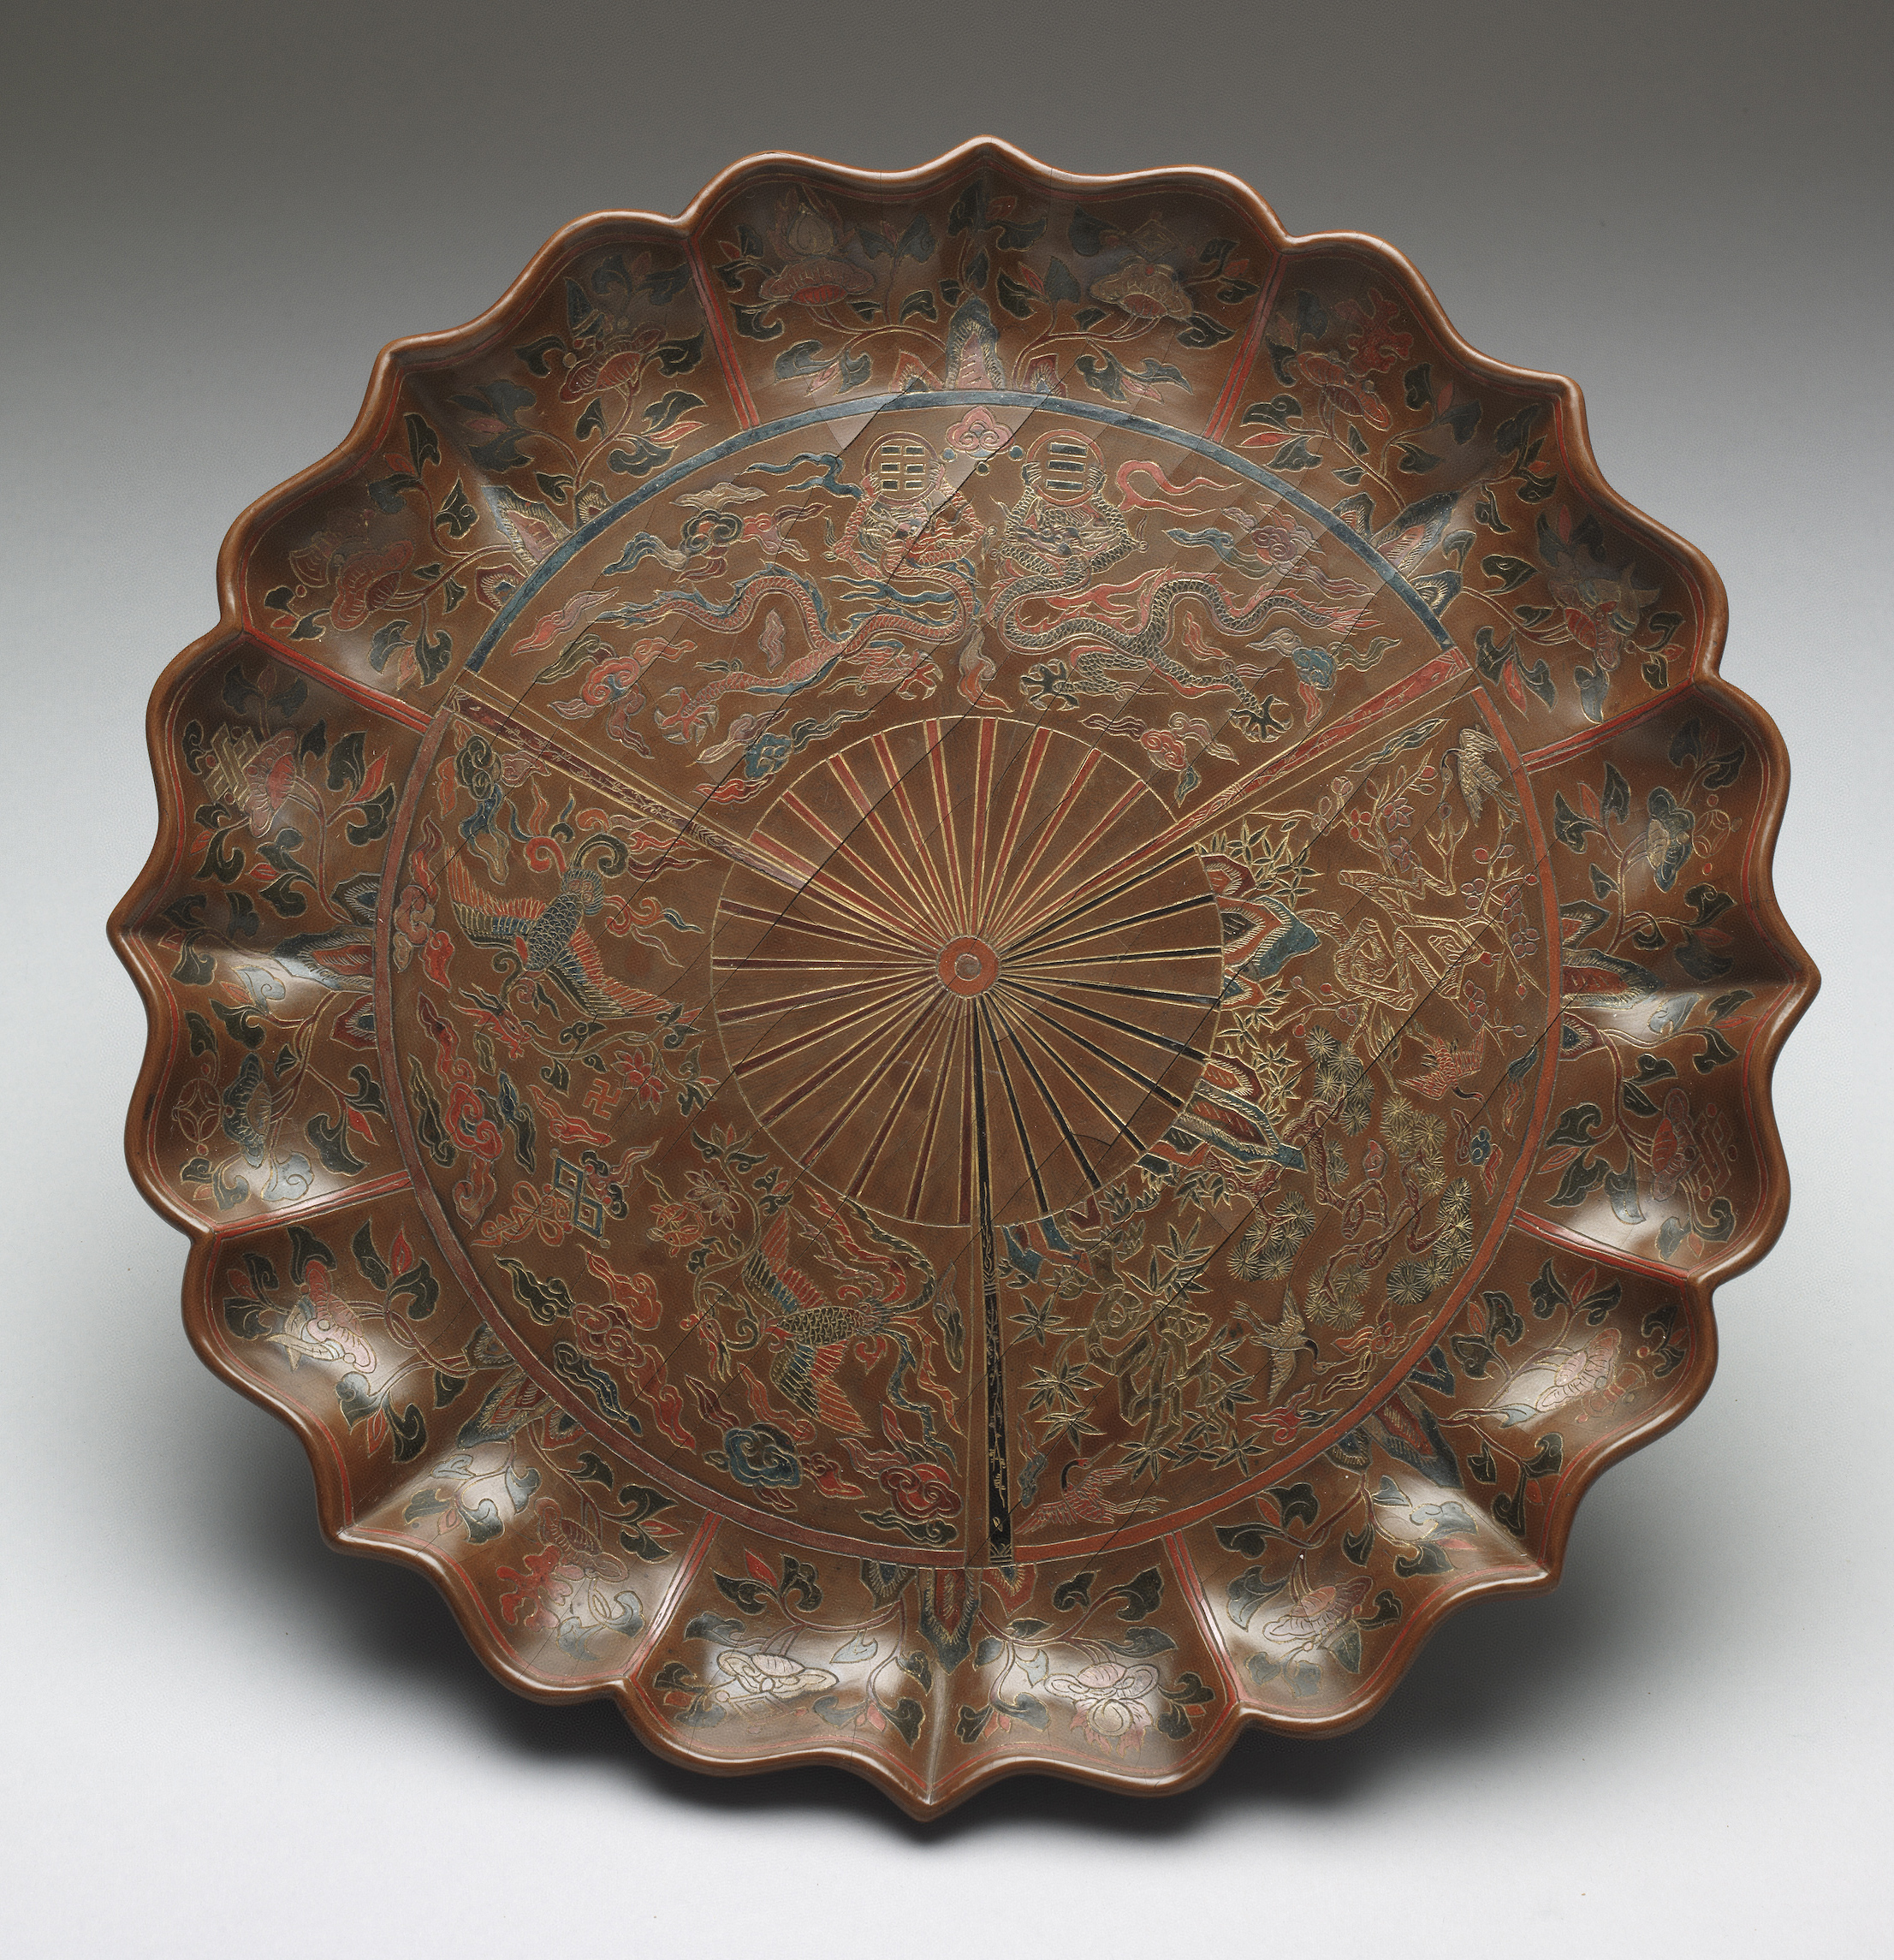 Eight-petal polychrome lacquer plate with auspicious patterns and engraved gold design